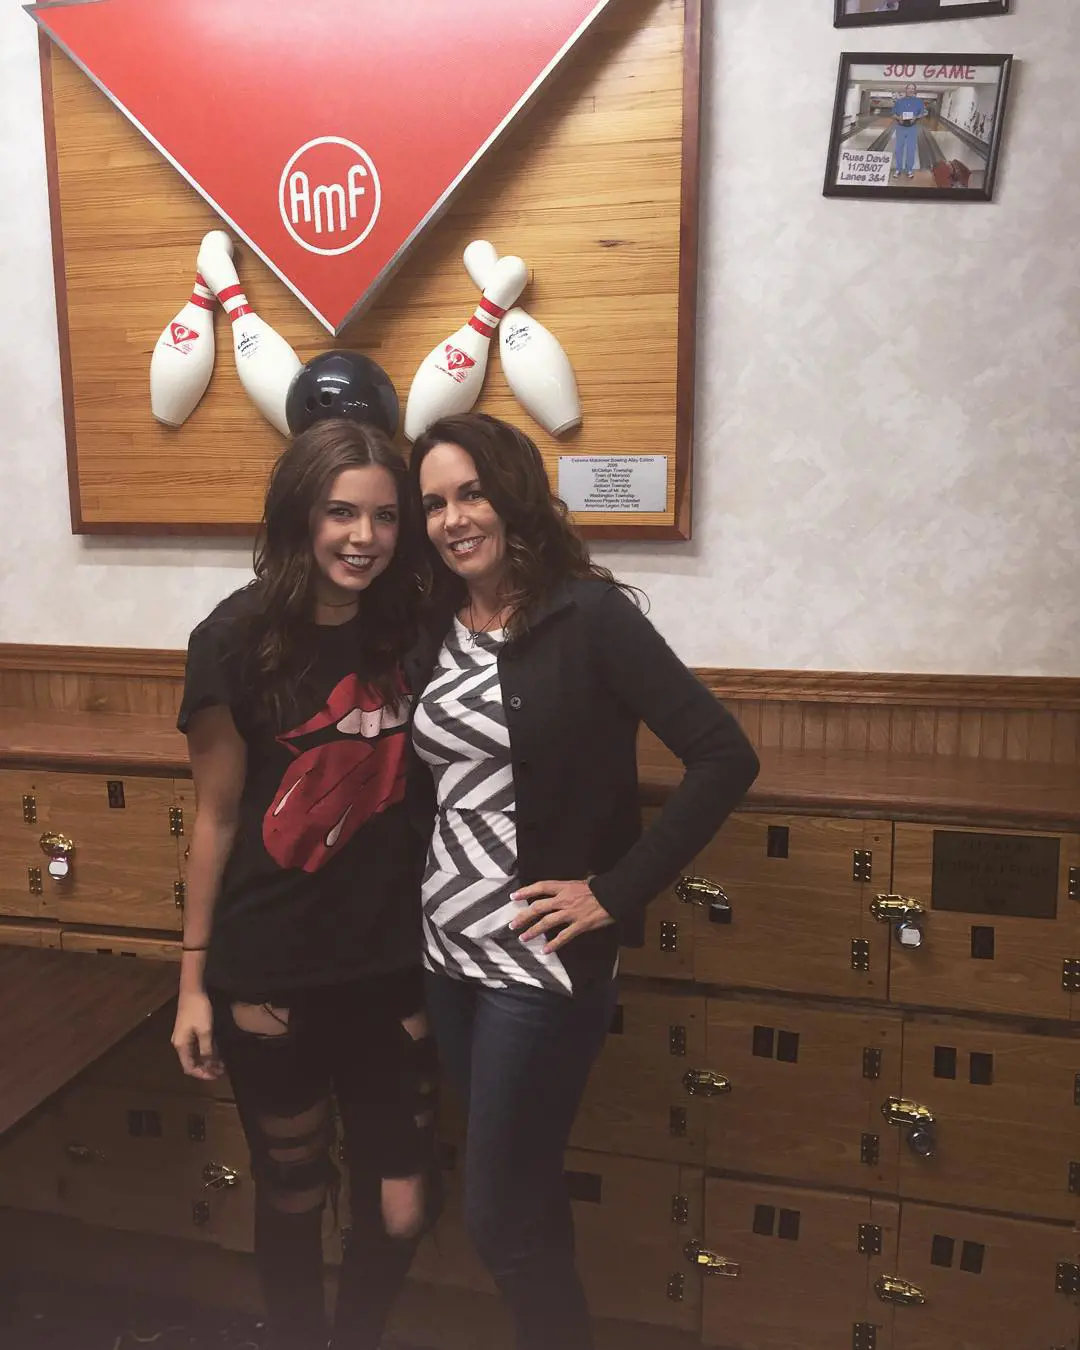 Beth (on the right) with her daughter Meghan at a bowling center in LA in December 2015